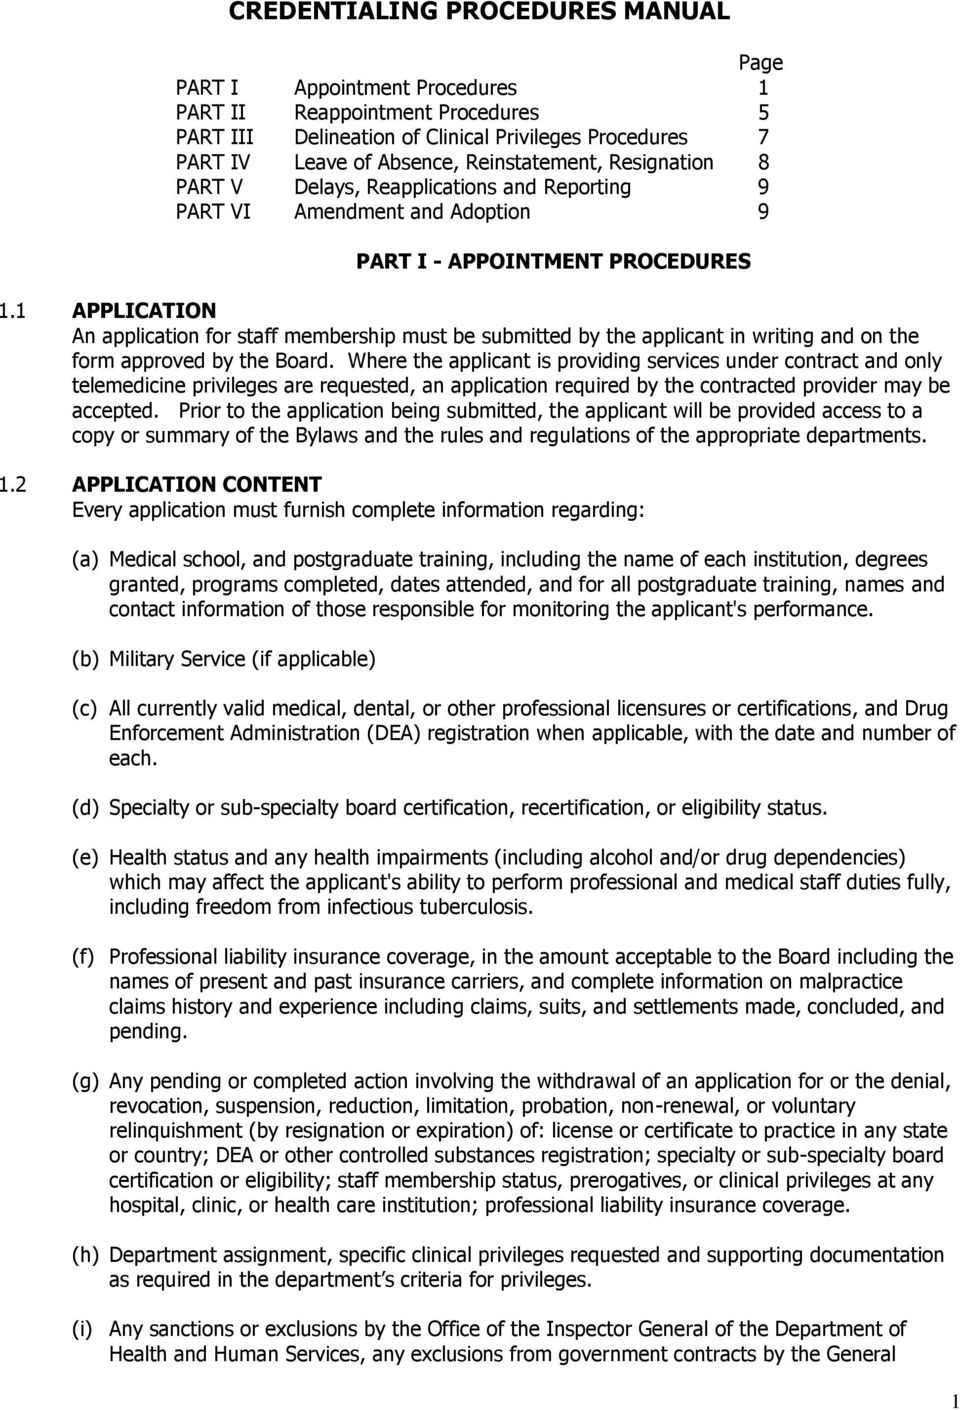 1 APPLICATION An application for staff membership must be submitted by the applicant in writing and on the form approved by the Board.